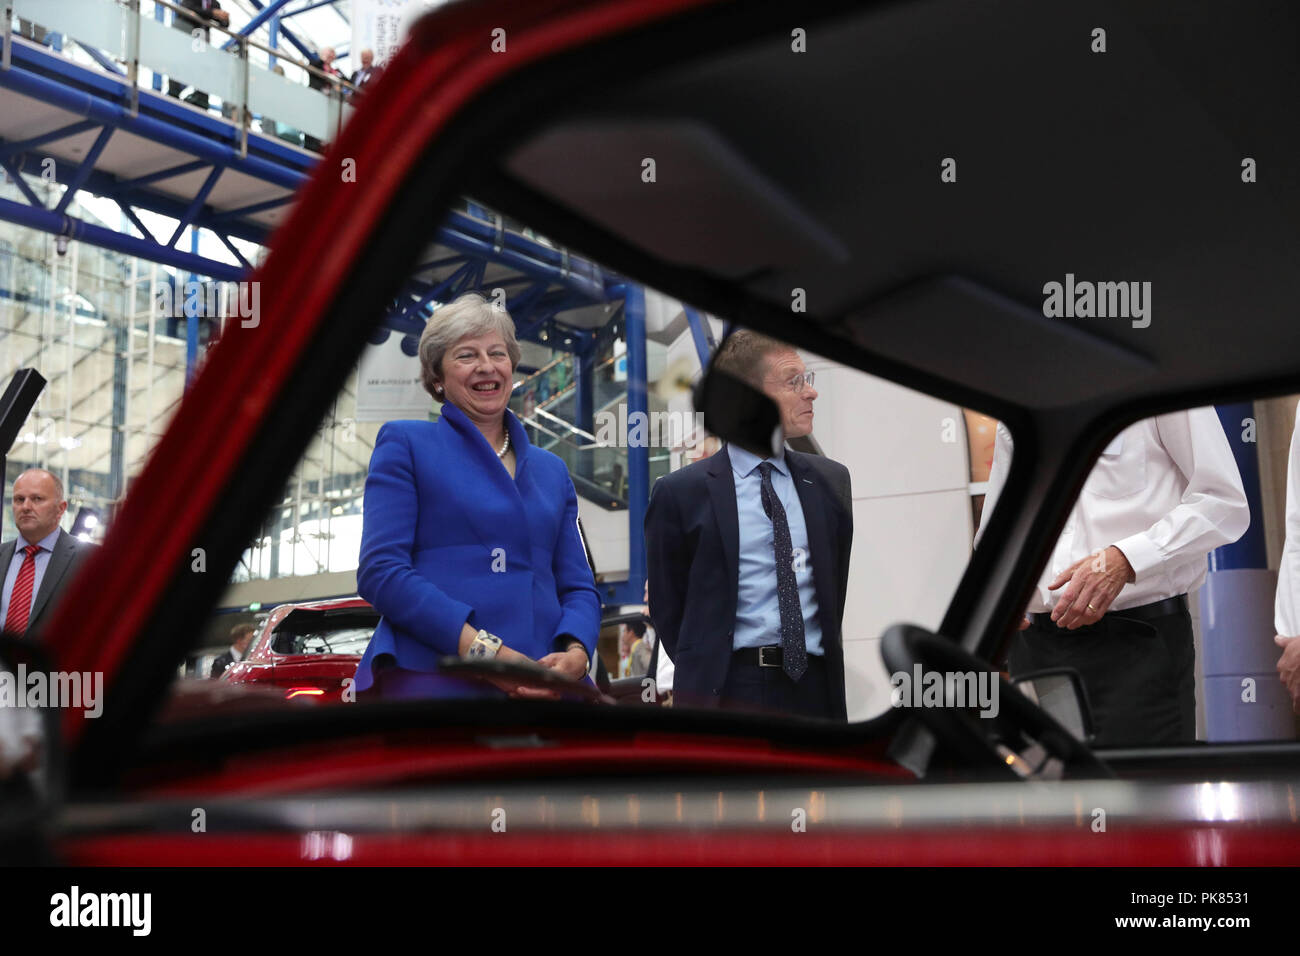 Prime Minister Theresa May and Mayor of the West Midlands' Andy Street, during the Zero Emission Vehicle Summit at the ICC in Birmingham. Stock Photo